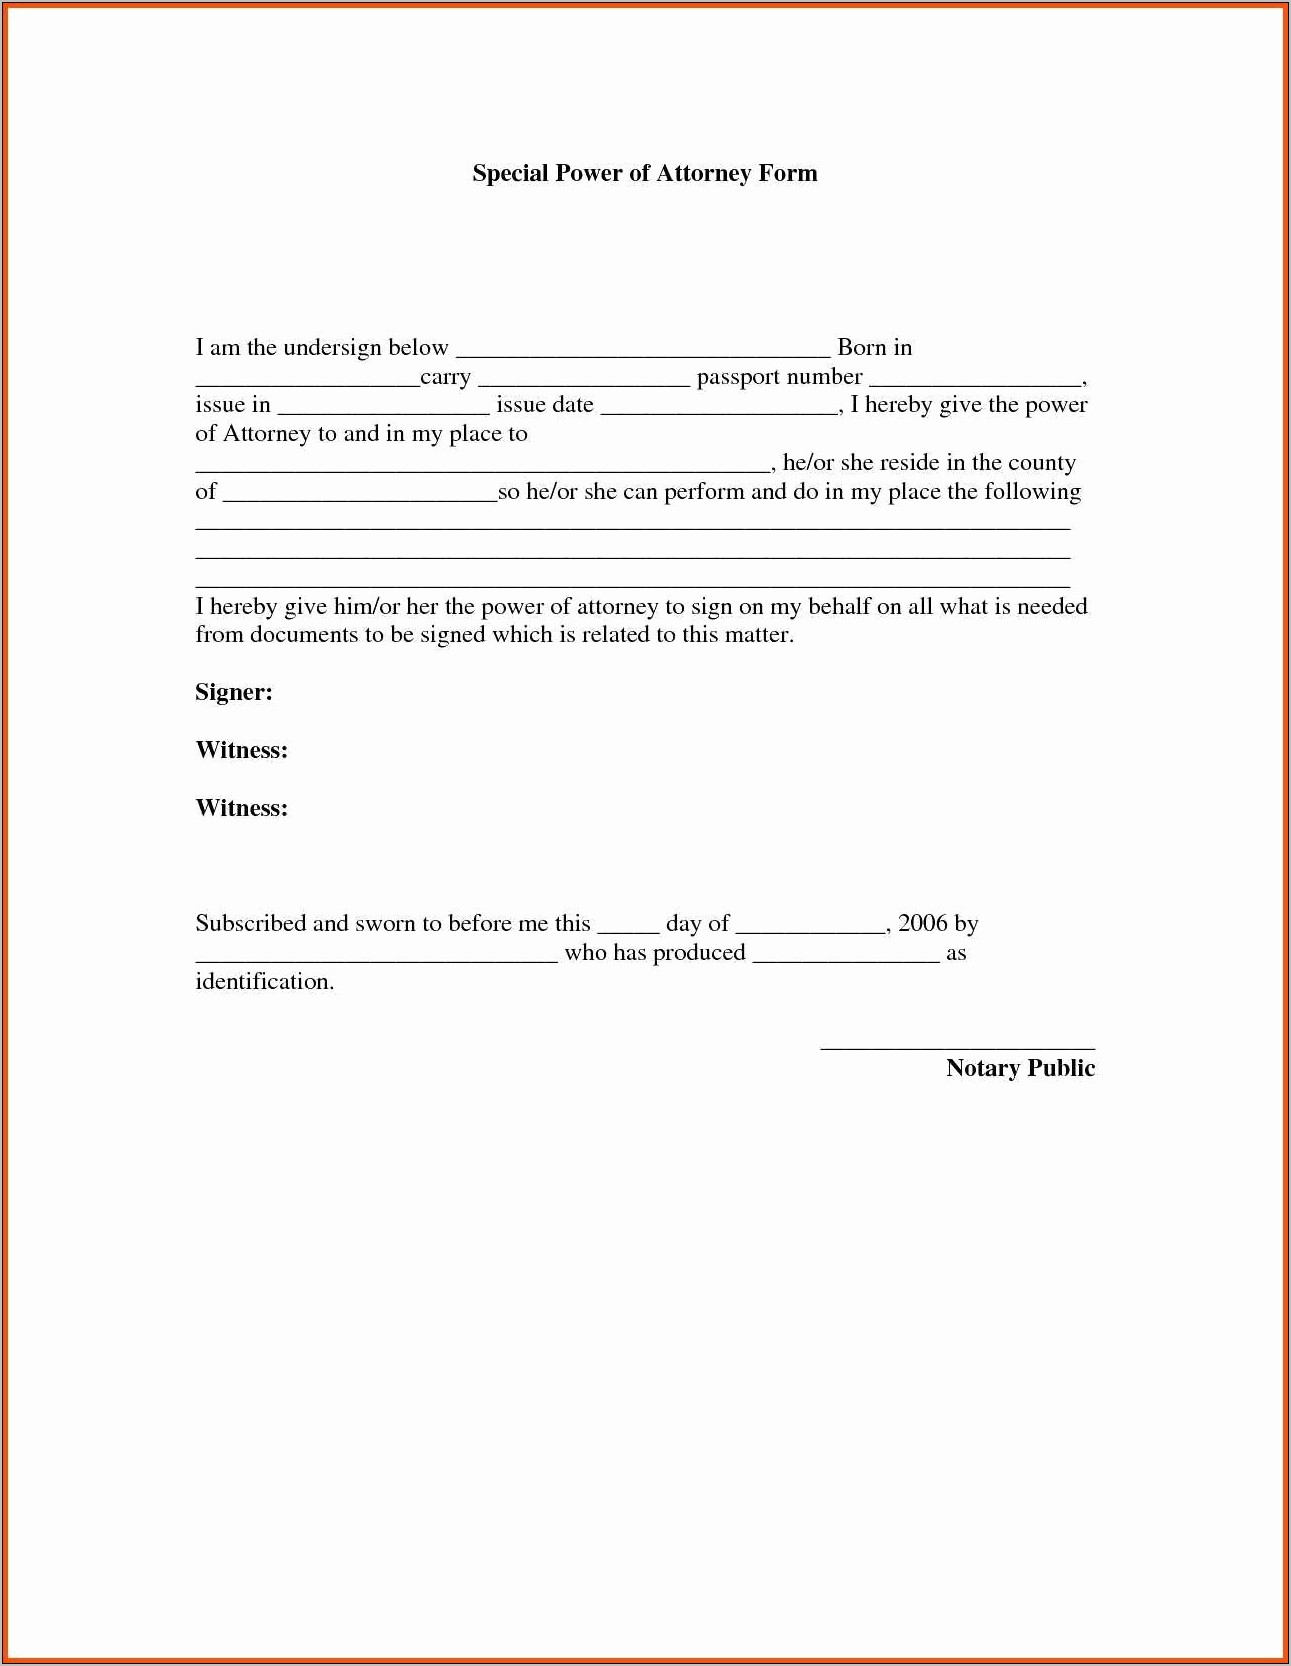 Royal Bank Power Of Attorney Form